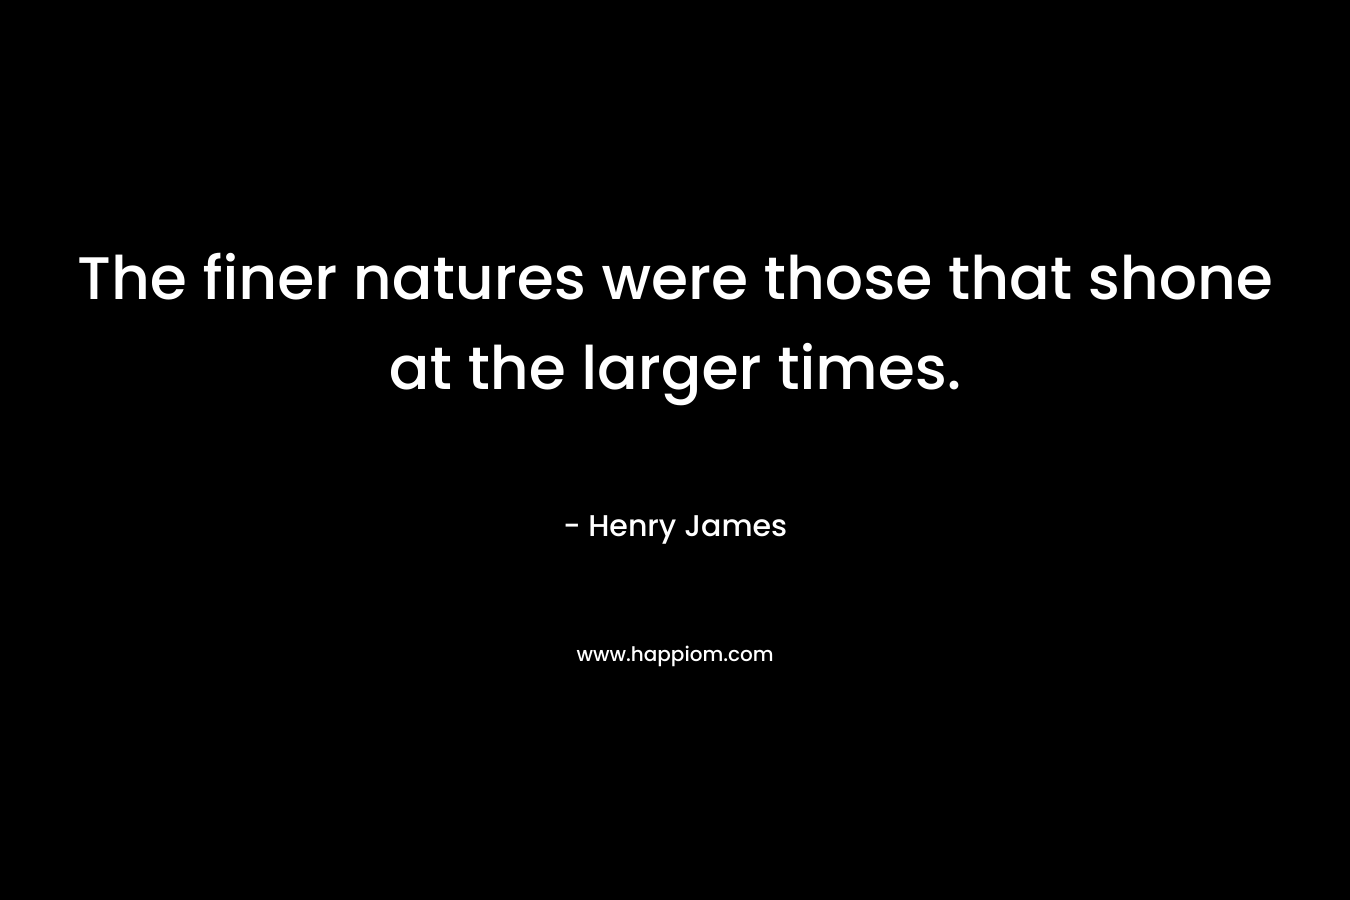 The finer natures were those that shone at the larger times. – Henry James